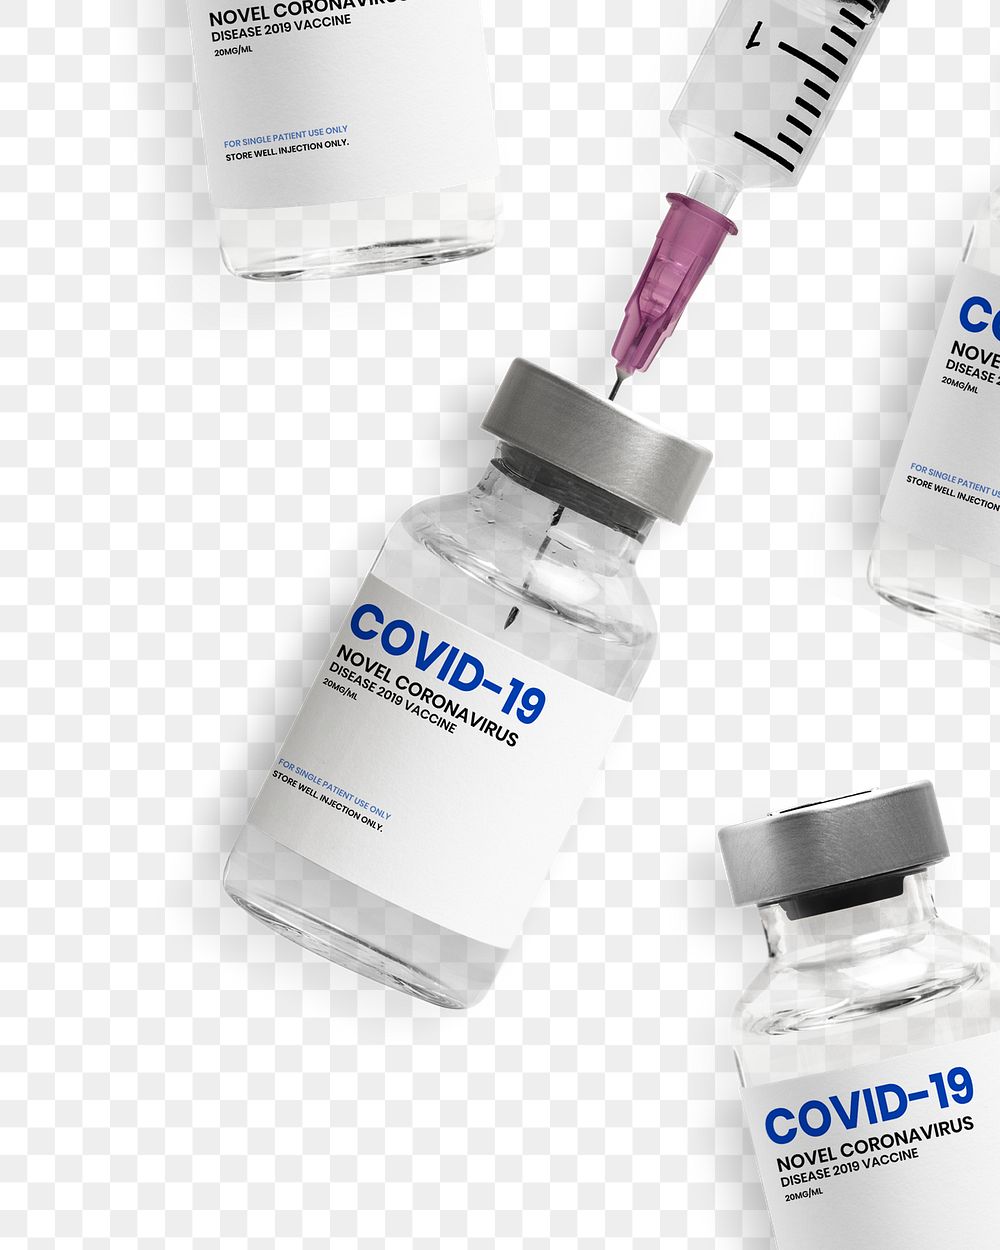 Vaccine vial mockup png with a needle syringe